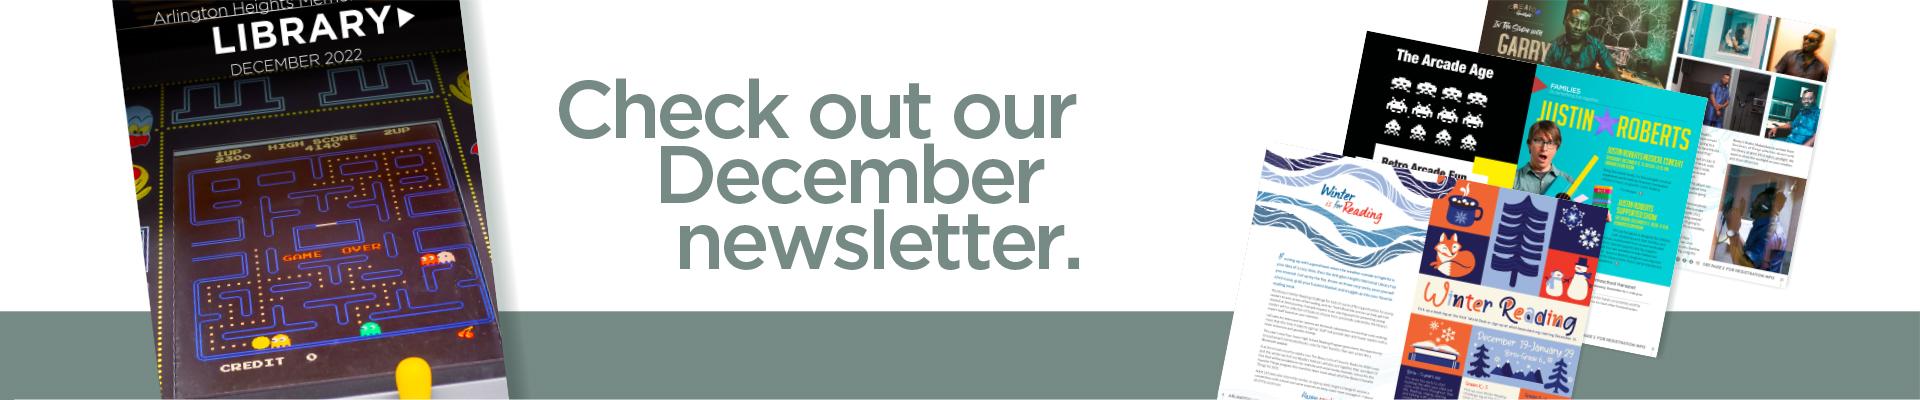 Check out our December newsletter